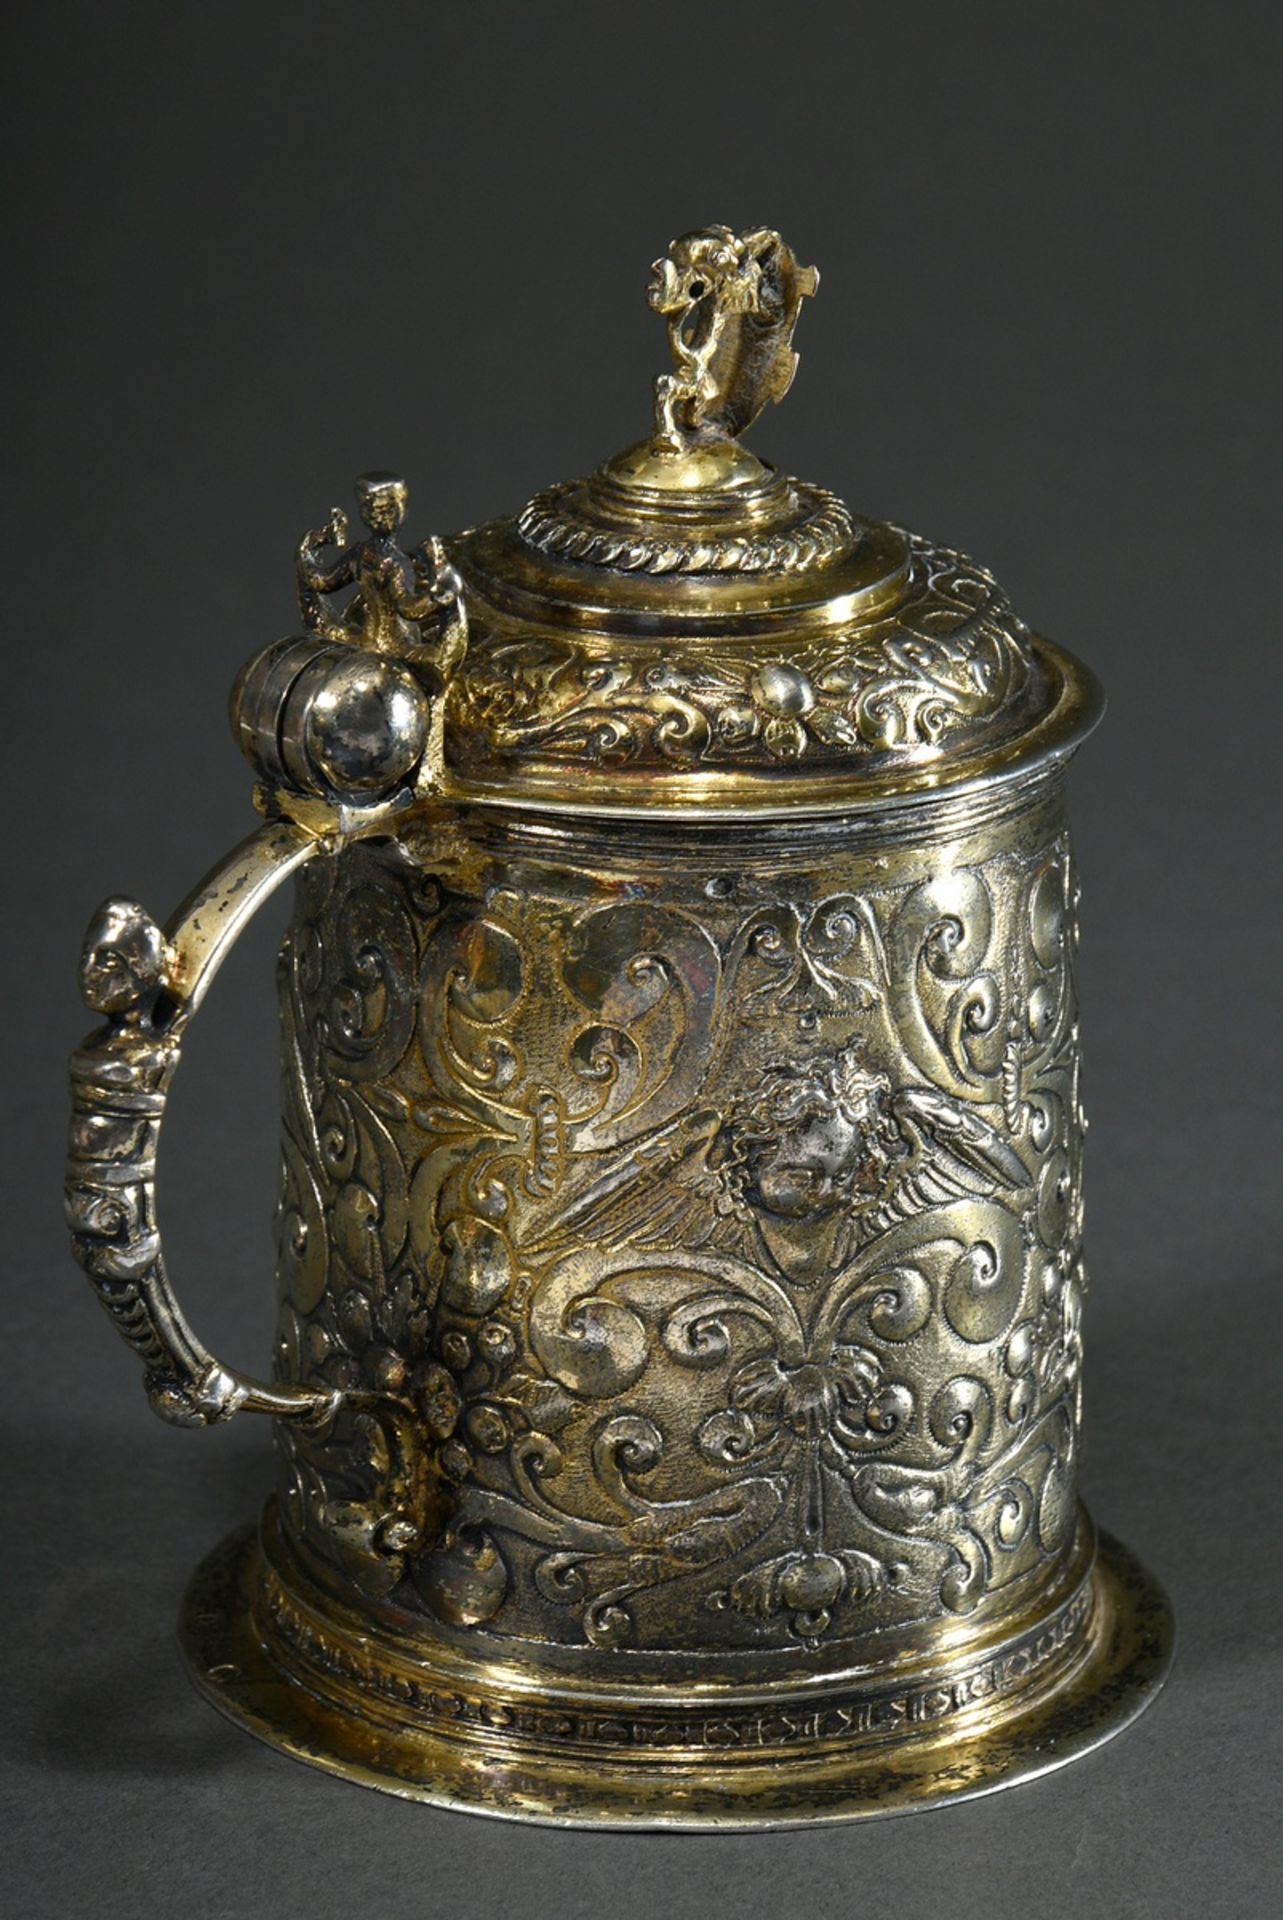 Small Mannerist lidded tankard with "fruit hangings and winged angels' heads" between scrollwork ov - Image 3 of 11